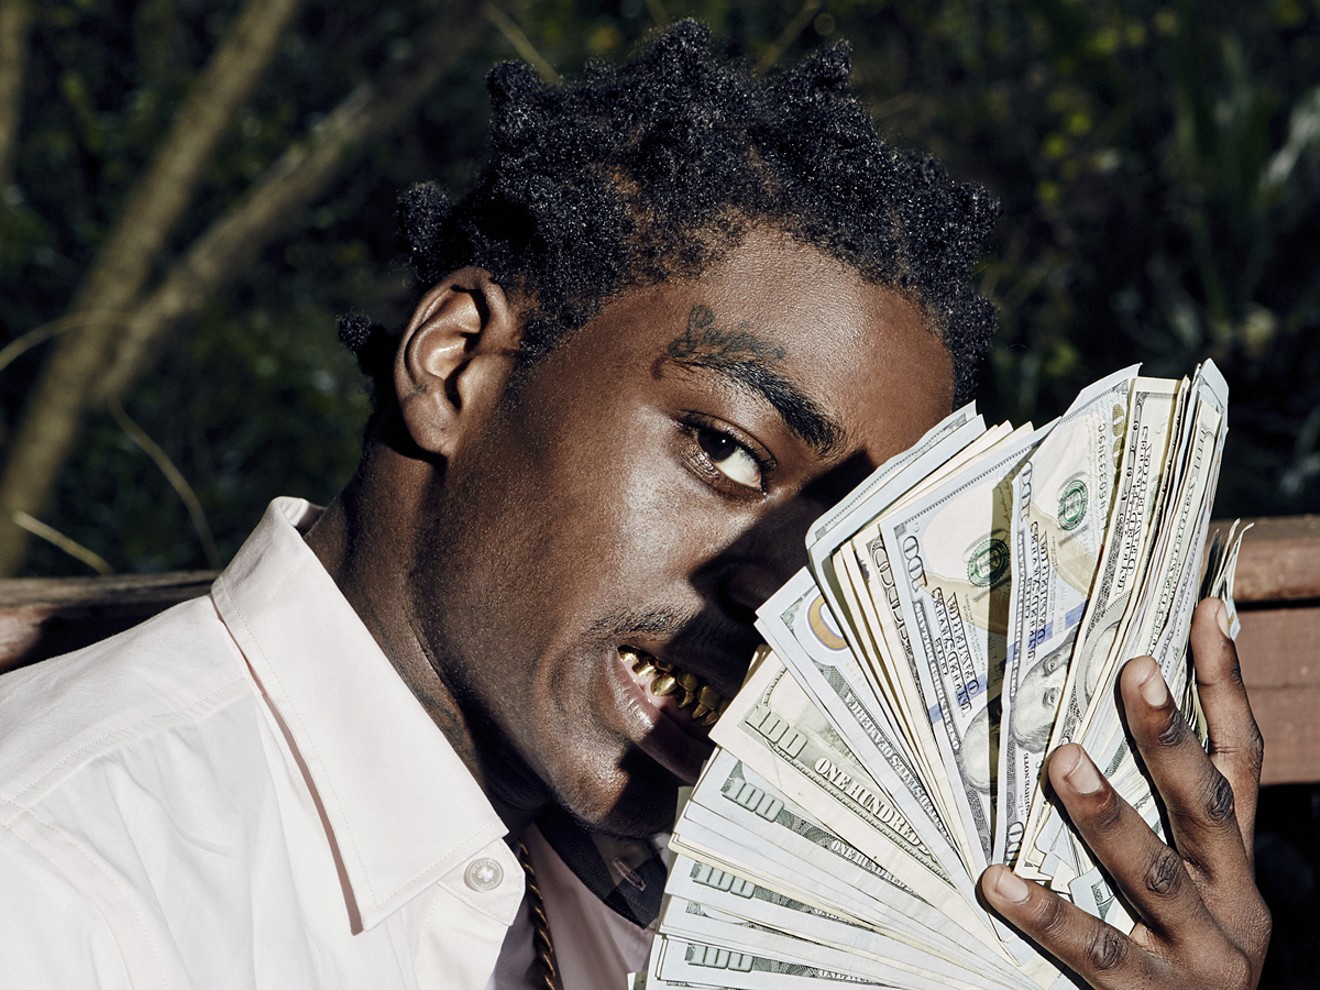 Kodak Black's debut album, Painting Pictures, came out earlier this year.